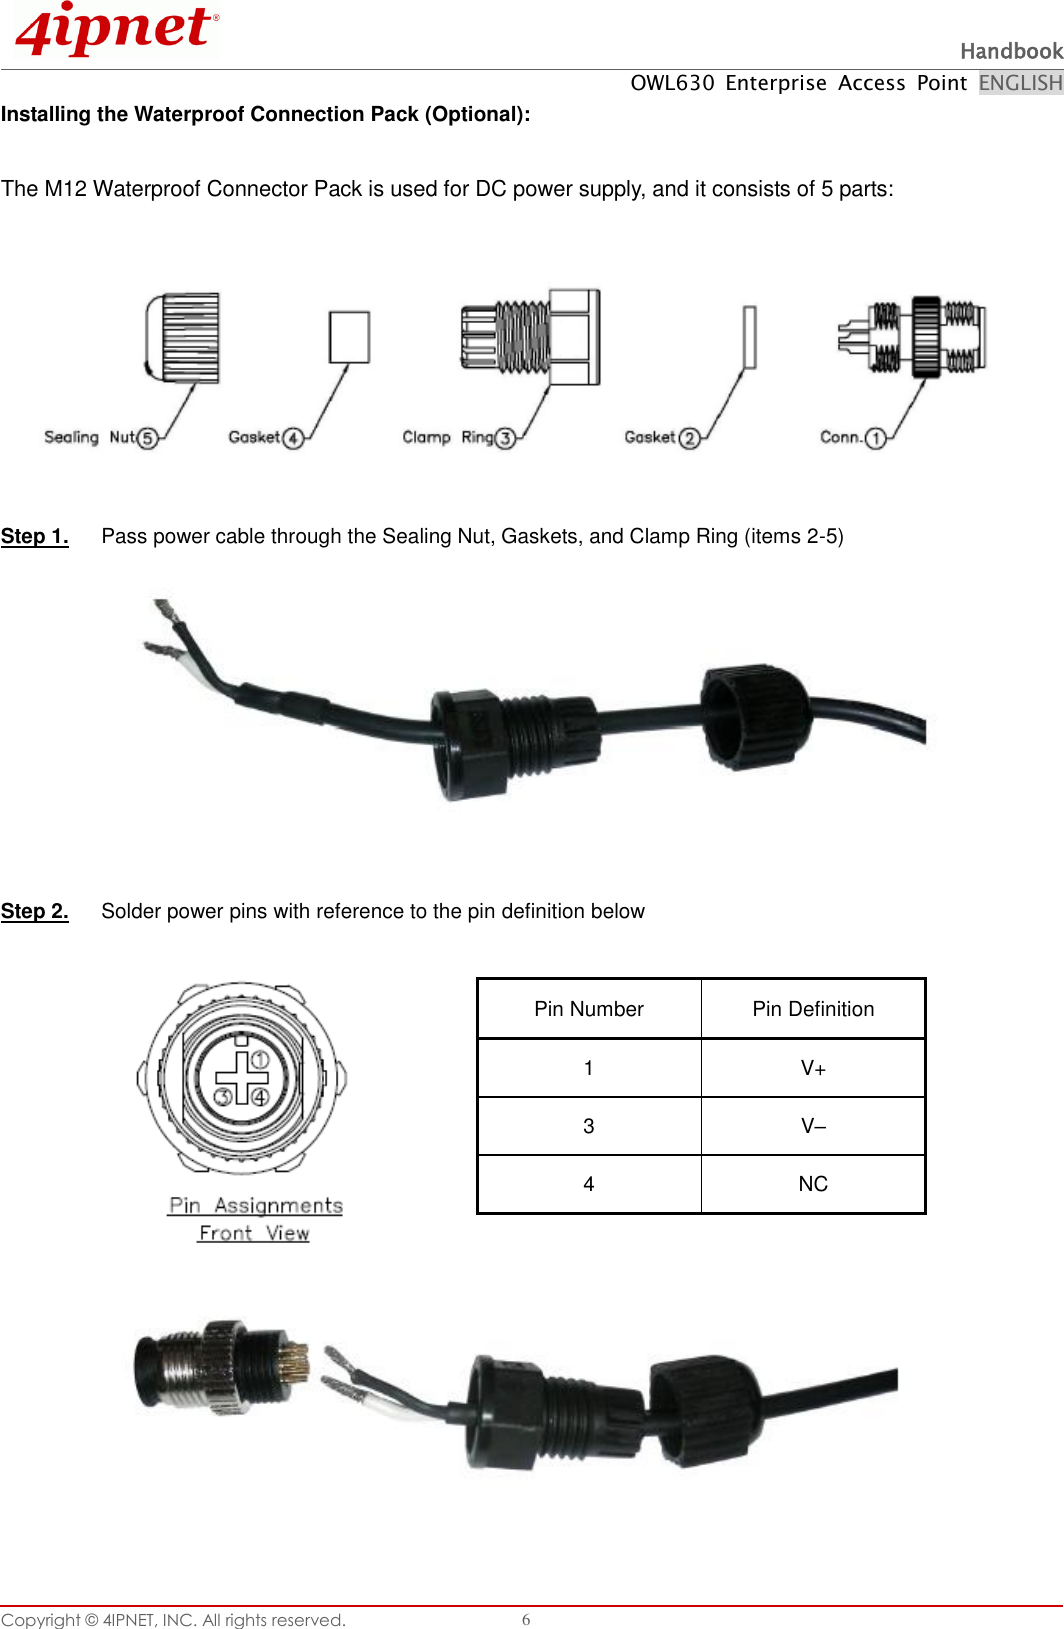  Handbook OWL630  Enterprise  Access  Point  ENGLISH Copyright ©  4IPNET, INC. All rights reserved.   6 Installing the Waterproof Connection Pack (Optional):  The M12 Waterproof Connector Pack is used for DC power supply, and it consists of 5 parts:    Step 1.  Pass power cable through the Sealing Nut, Gaskets, and Clamp Ring (items 2-5)   Step 2.  Solder power pins with reference to the pin definition below         Pin Number Pin Definition 1 V+ 3 V– 4 NC 